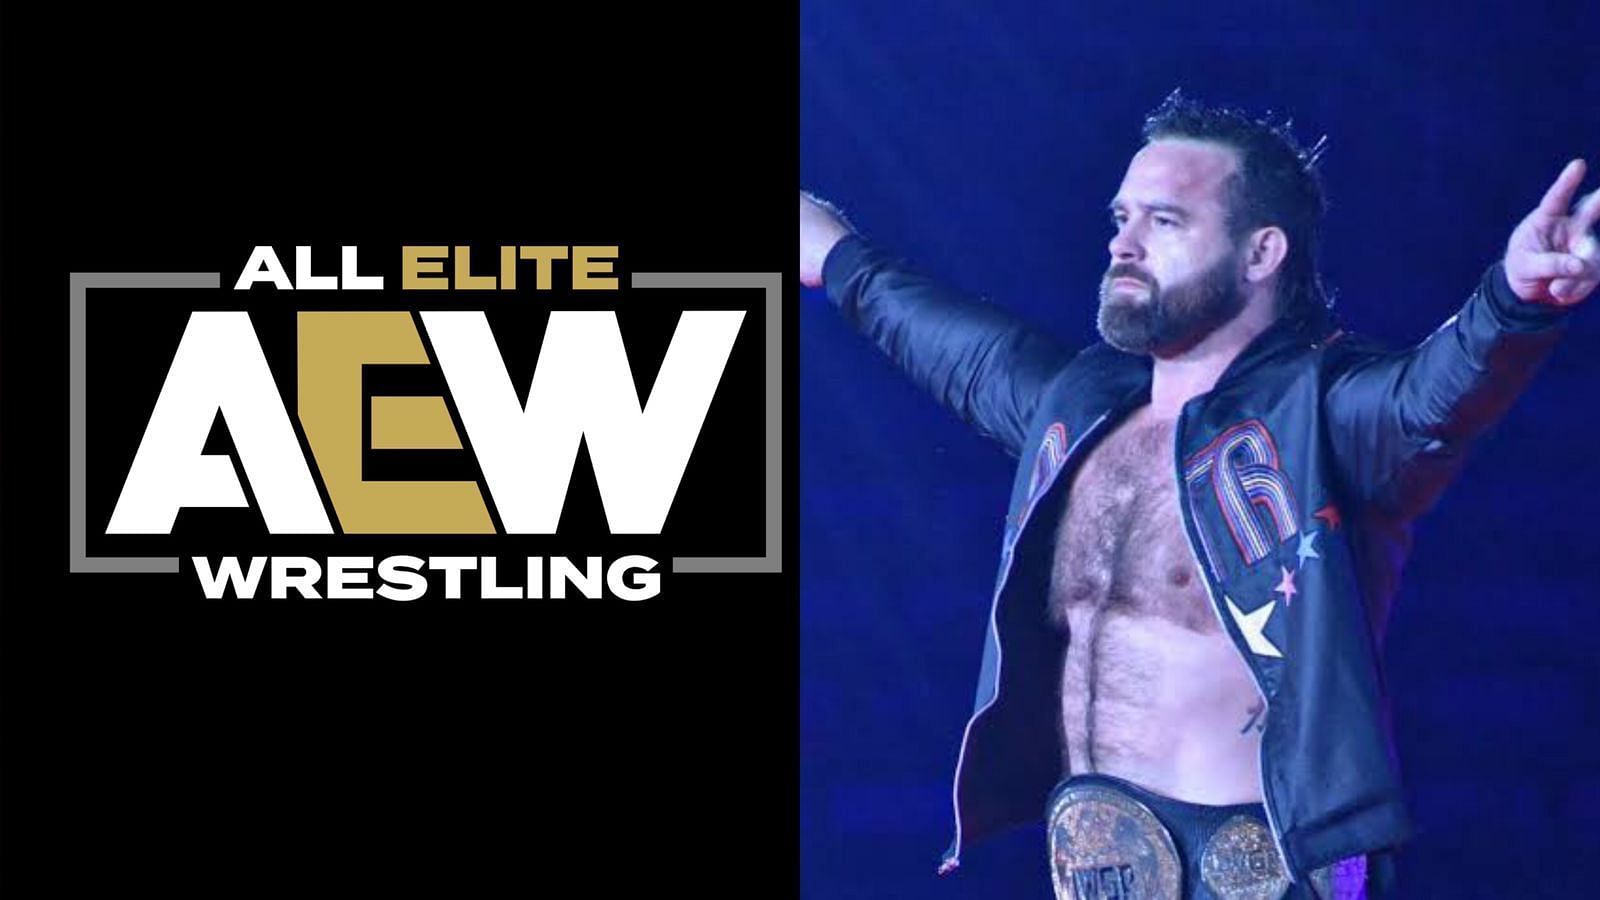 Cash Wheeler is one half of the AEW World Tag Team Champions